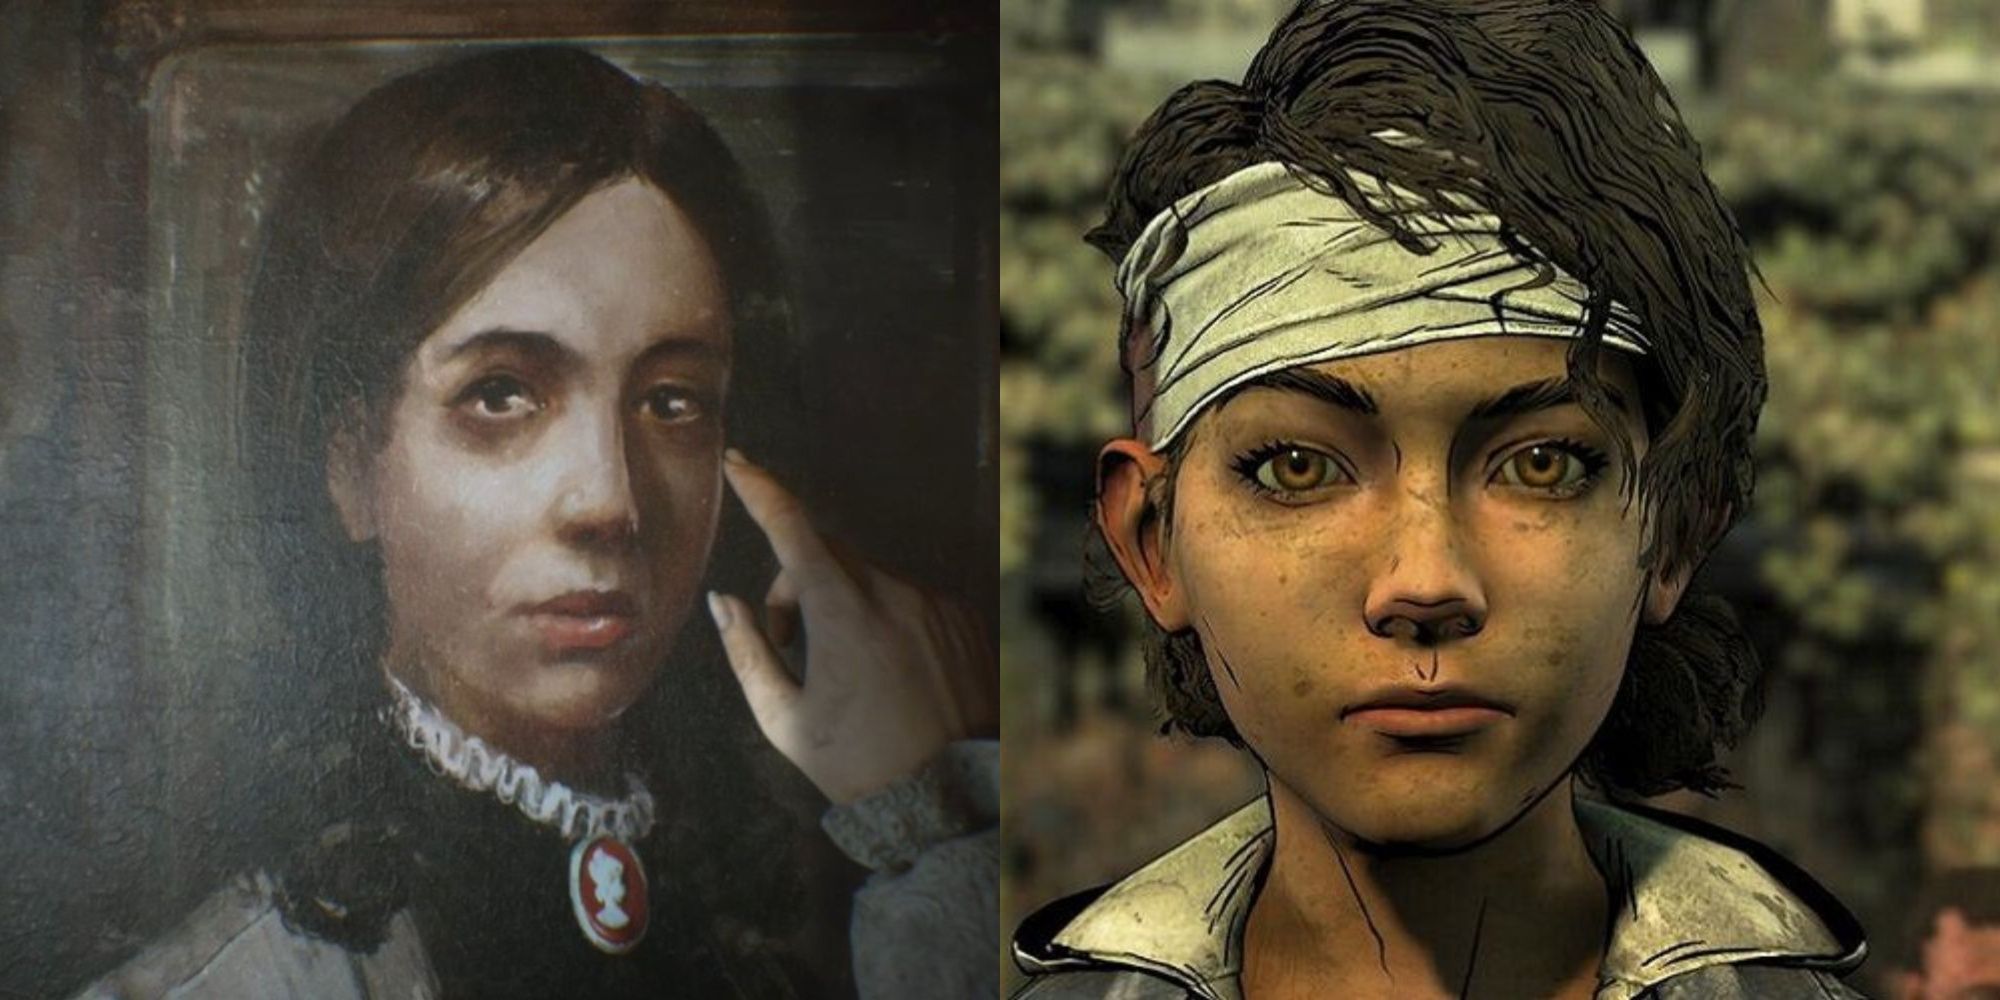 Story Based Horror Games Featured Split Image Layers Of Fear And The Walking Dead